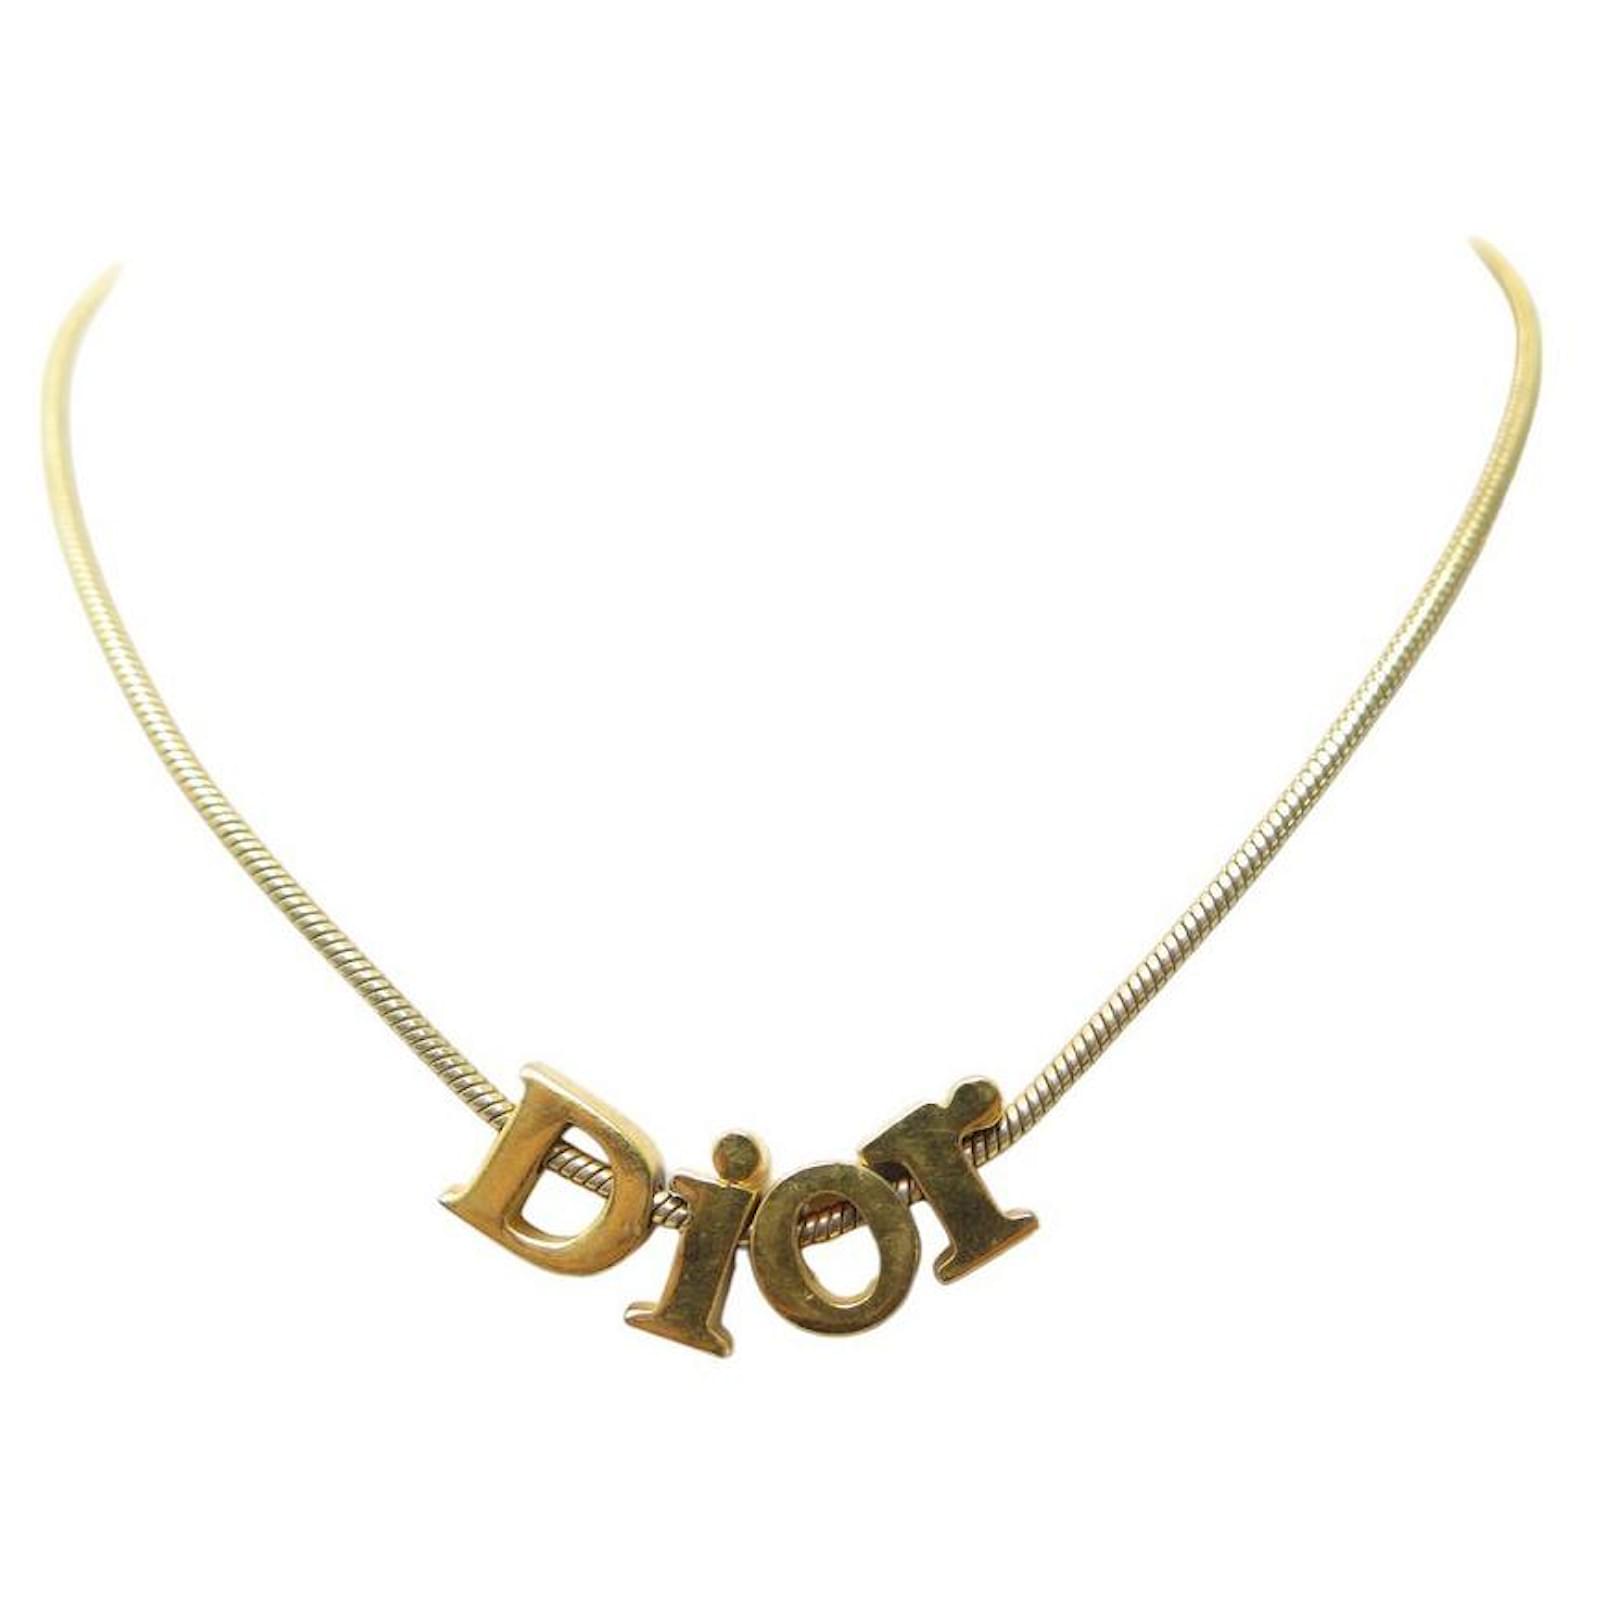 Dio(r)evolution Necklace Pink-Finish Metal and White Crystals | DIOR VN